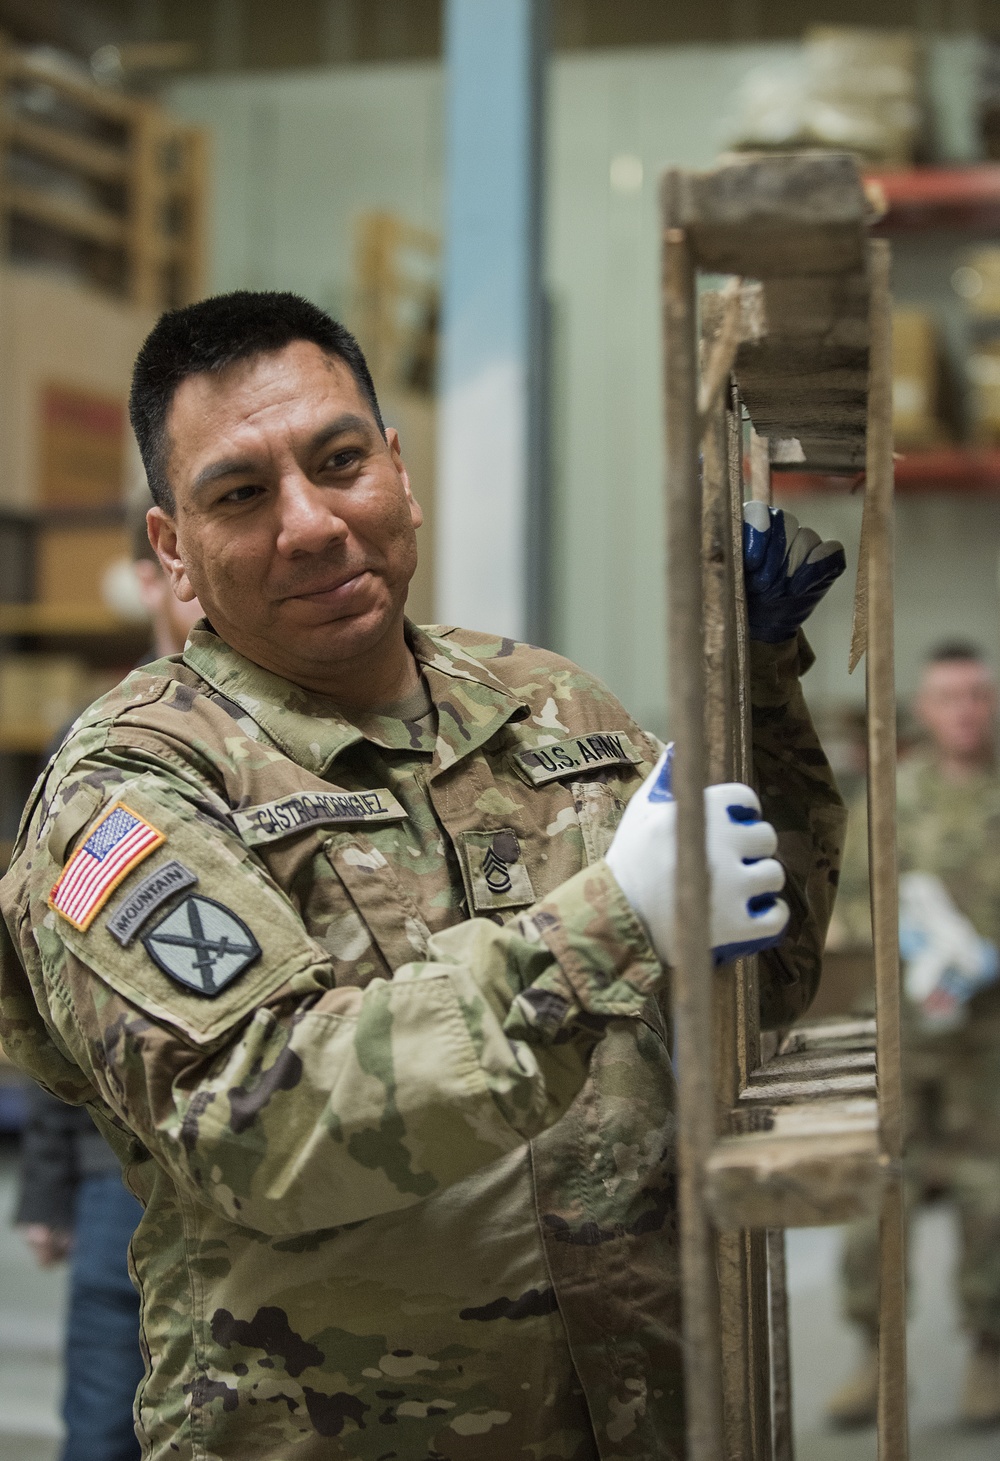 Idaho National Guard helps in a time of need during the COVID-19 pandemic